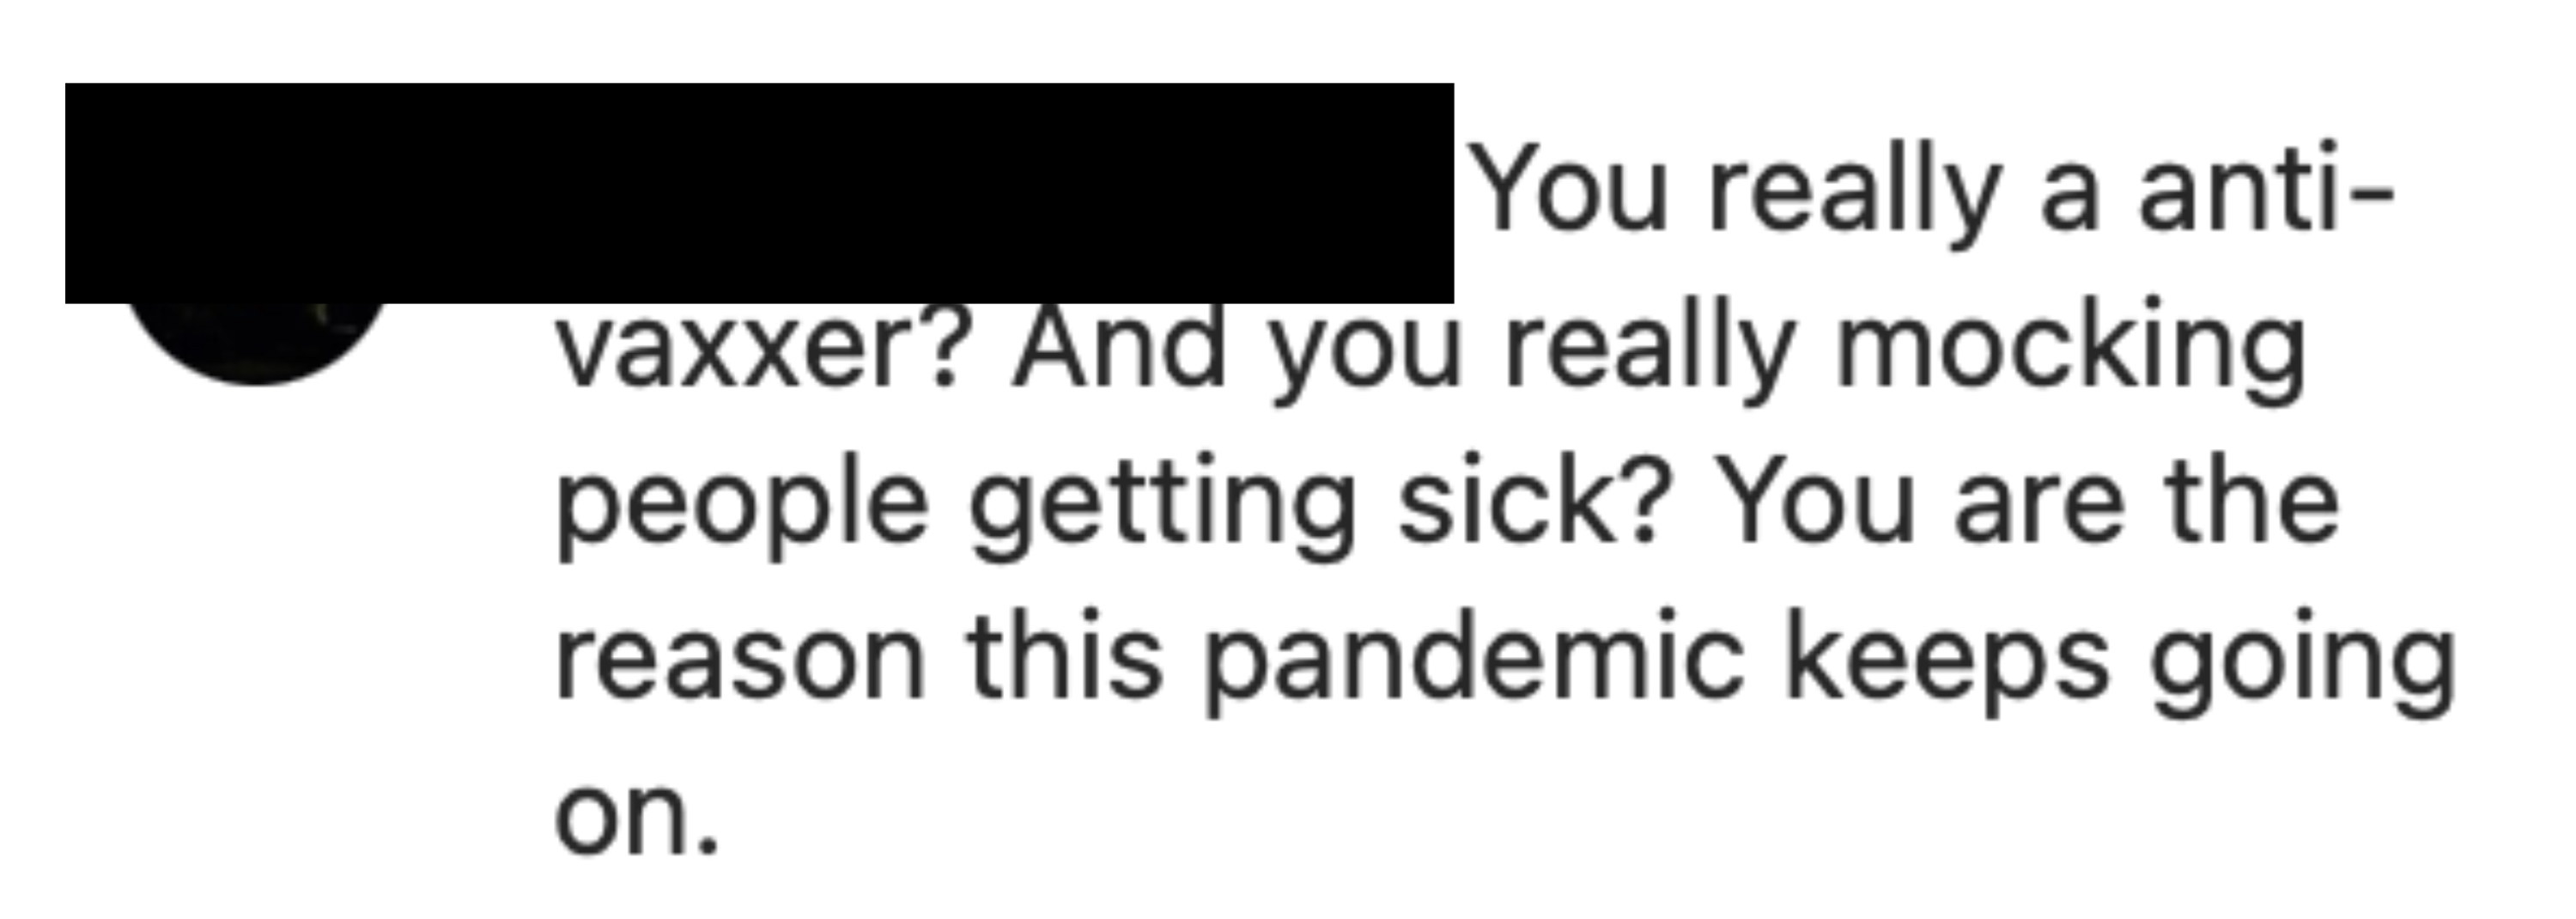 &quot;You&#x27;re really an anti-vaxxer? And you really mocking people getting sick? You are the reason this pandemic keeps going on&quot;